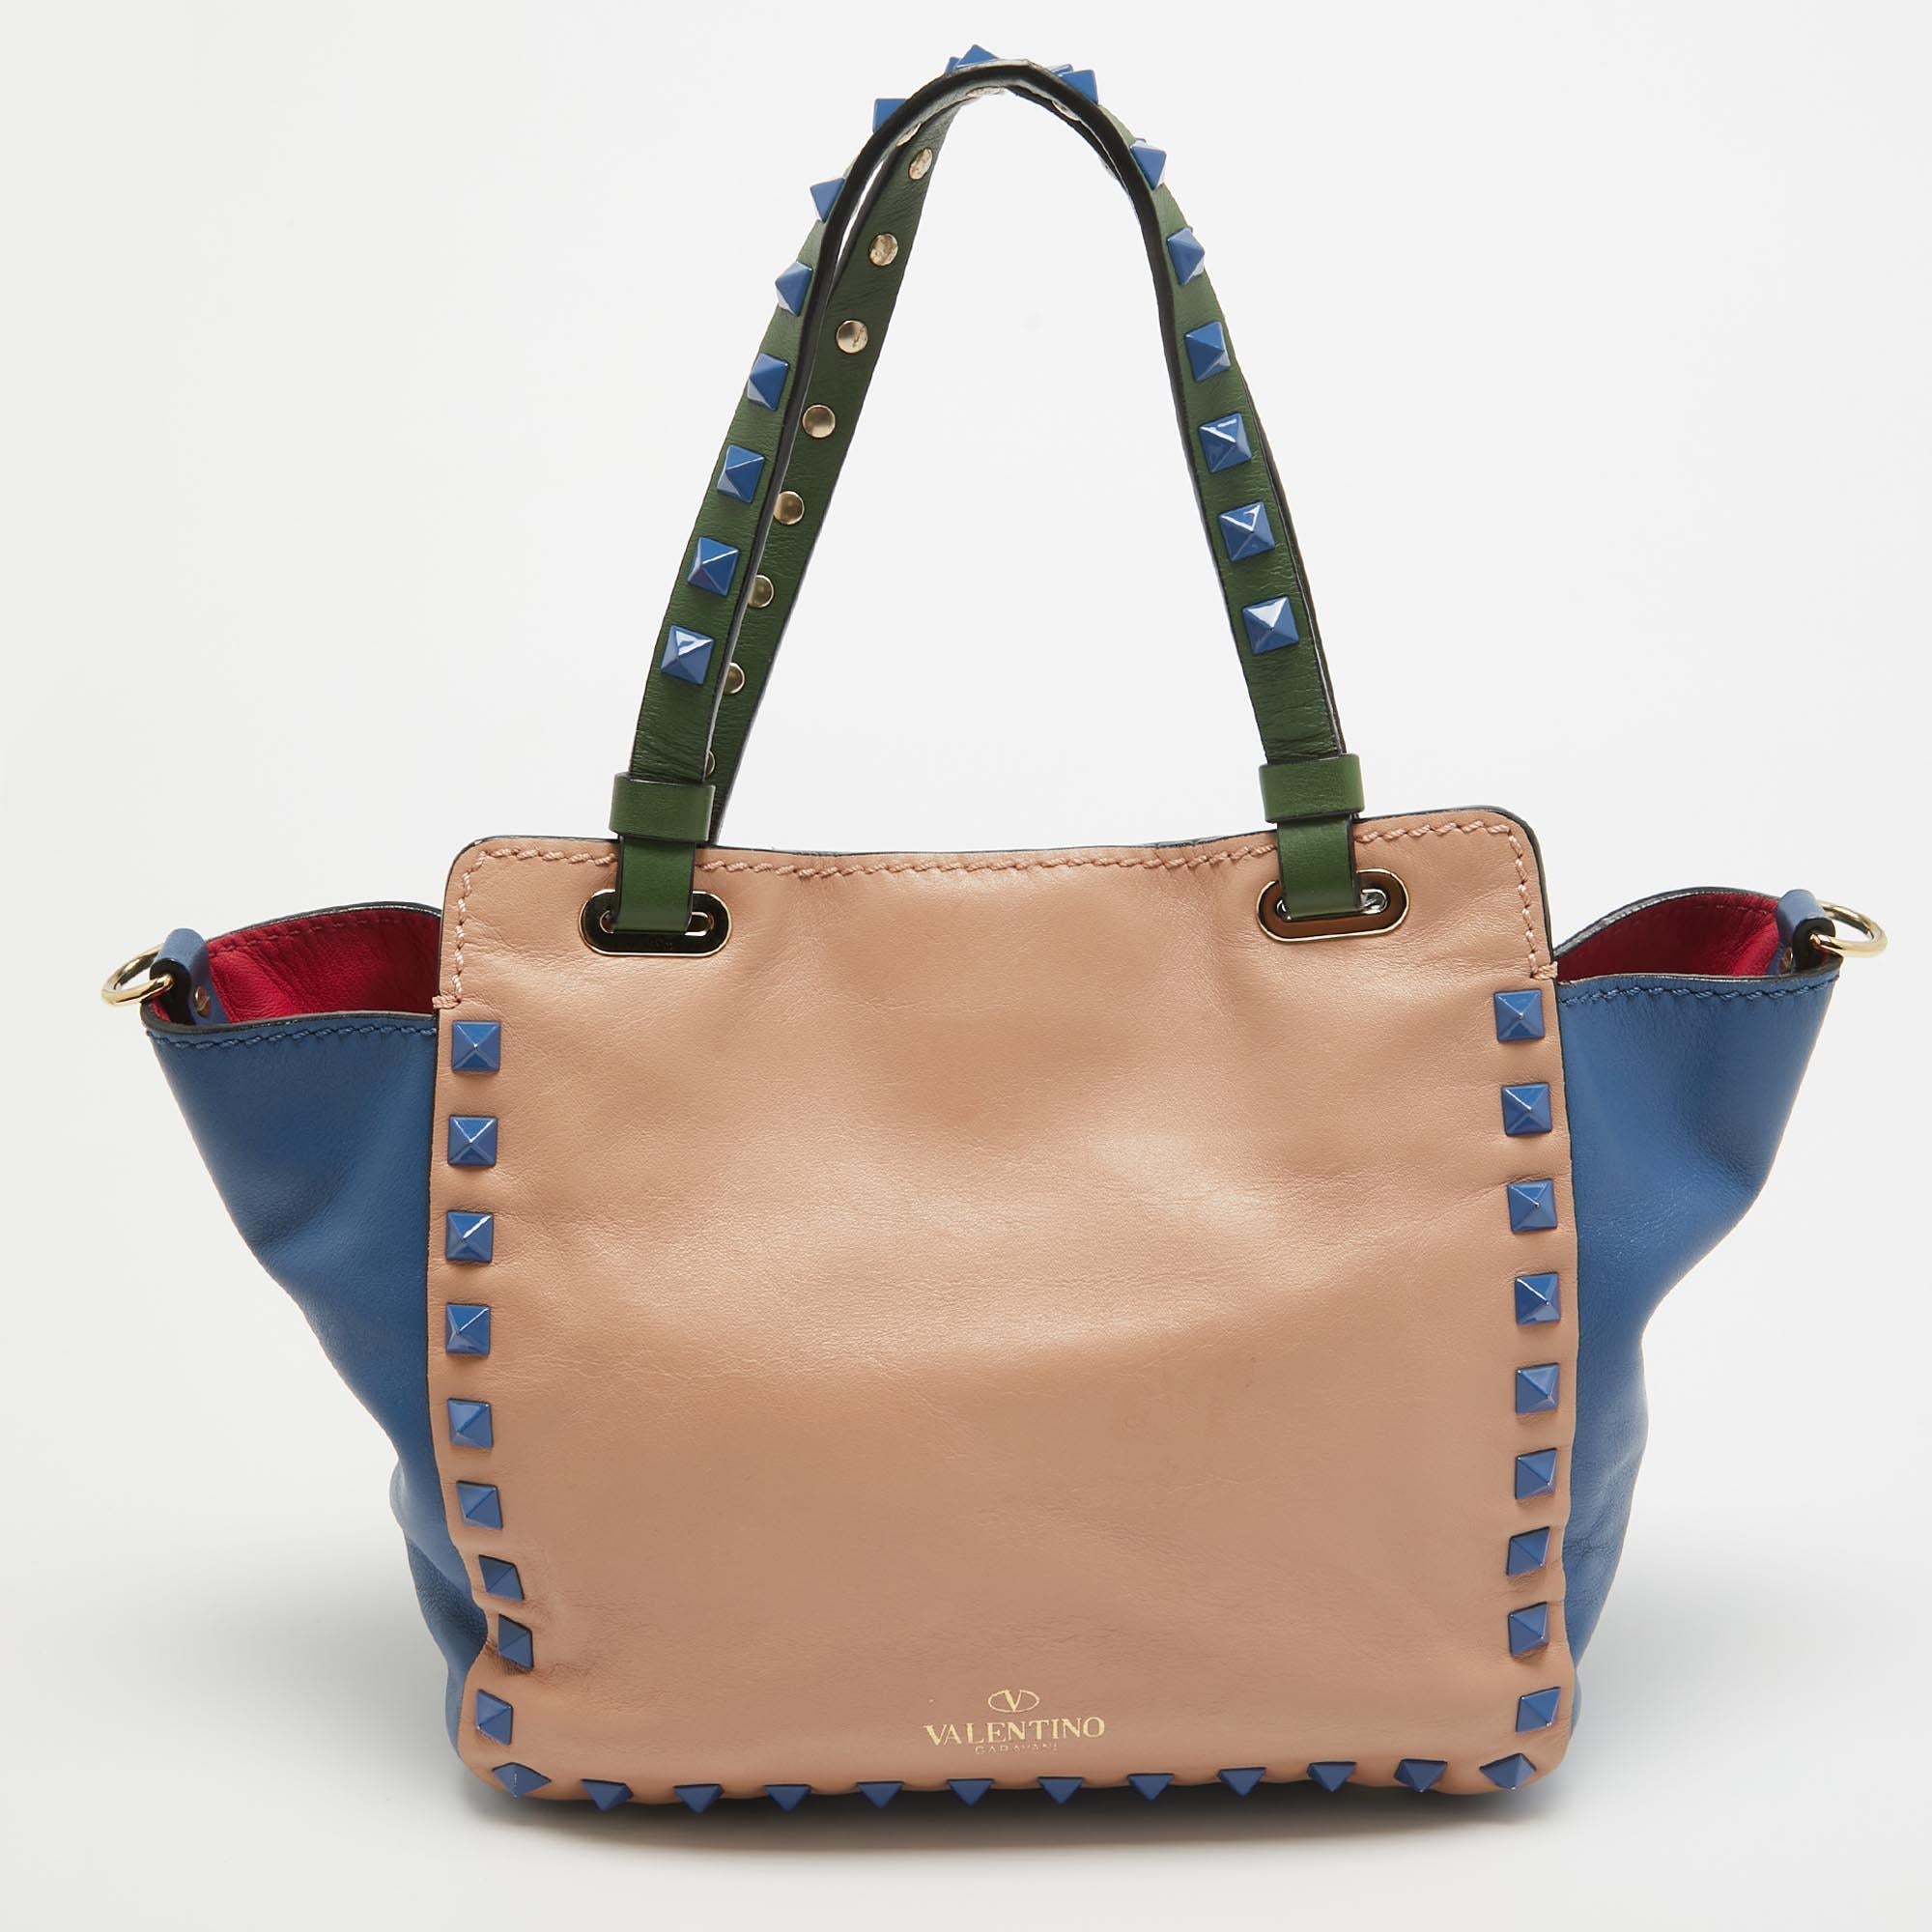 Know to create stylish, sophisticated, and timeless designs, this is a brand worth investing in. The bags that come from this label's atelier are exquisite. This Valentino Trapeze tote bag is no different. It has been made from quality materials and